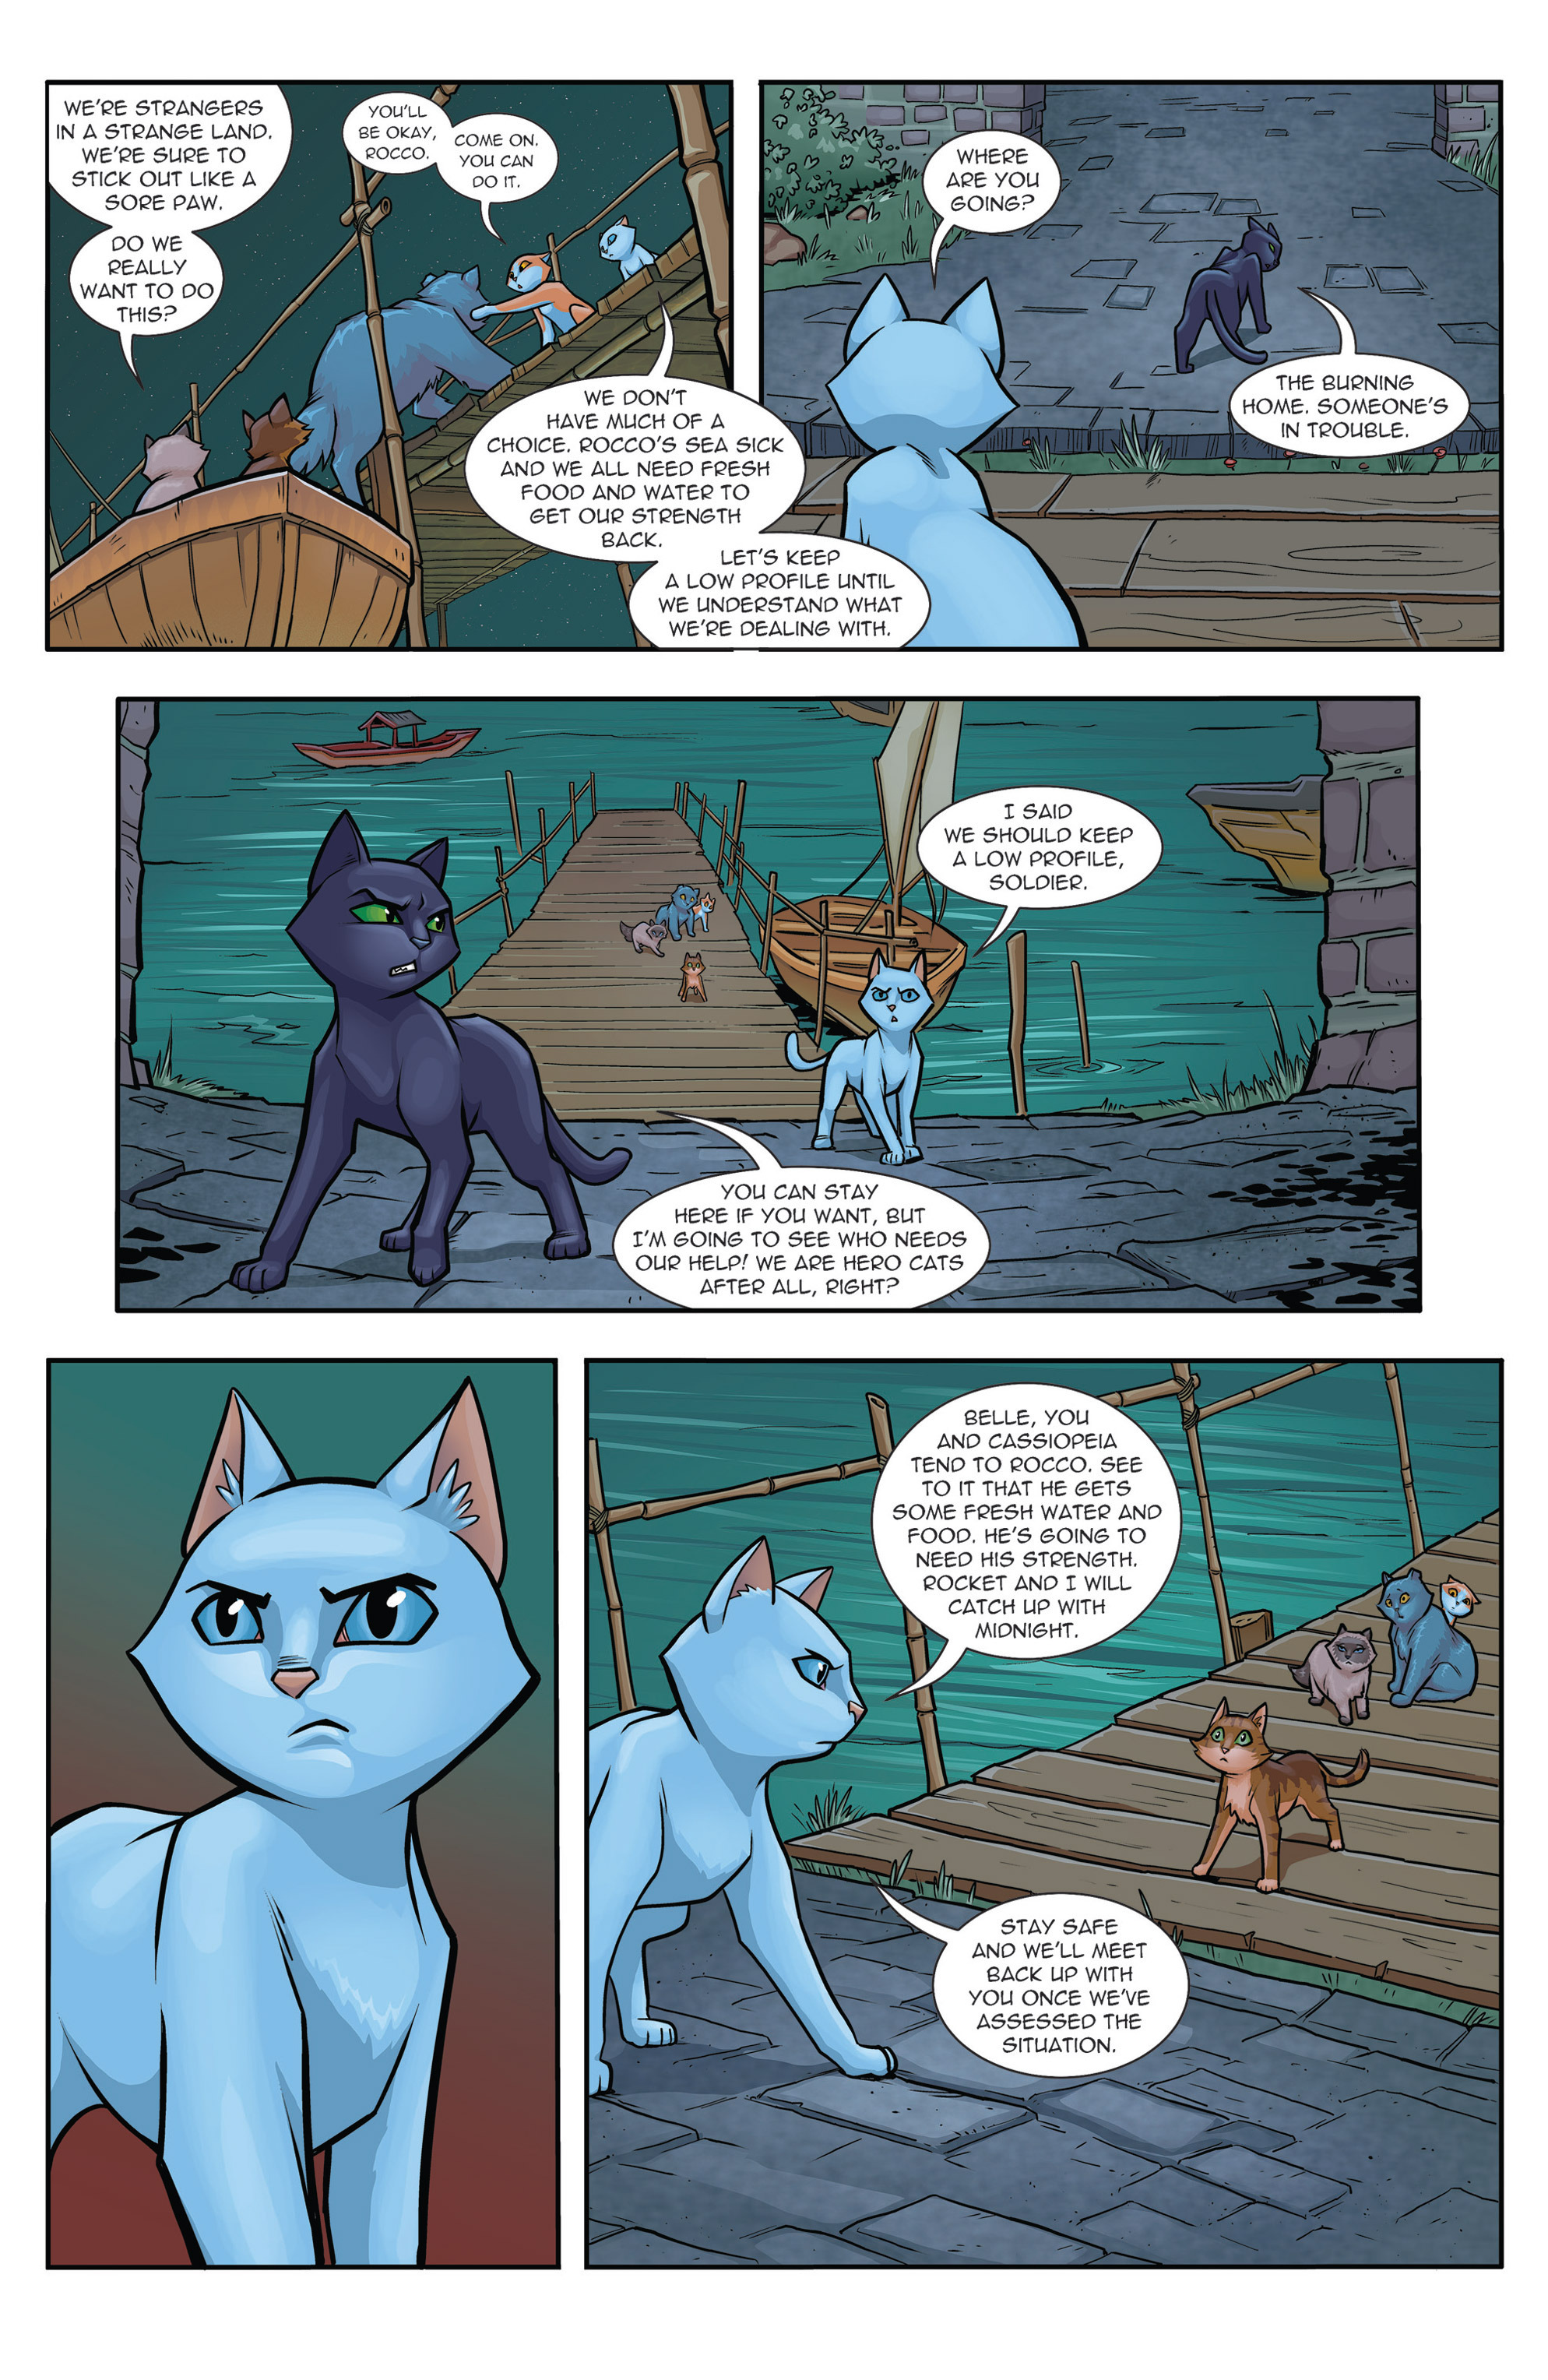 Hero Cats (2014-): Chapter 12 - Page 3